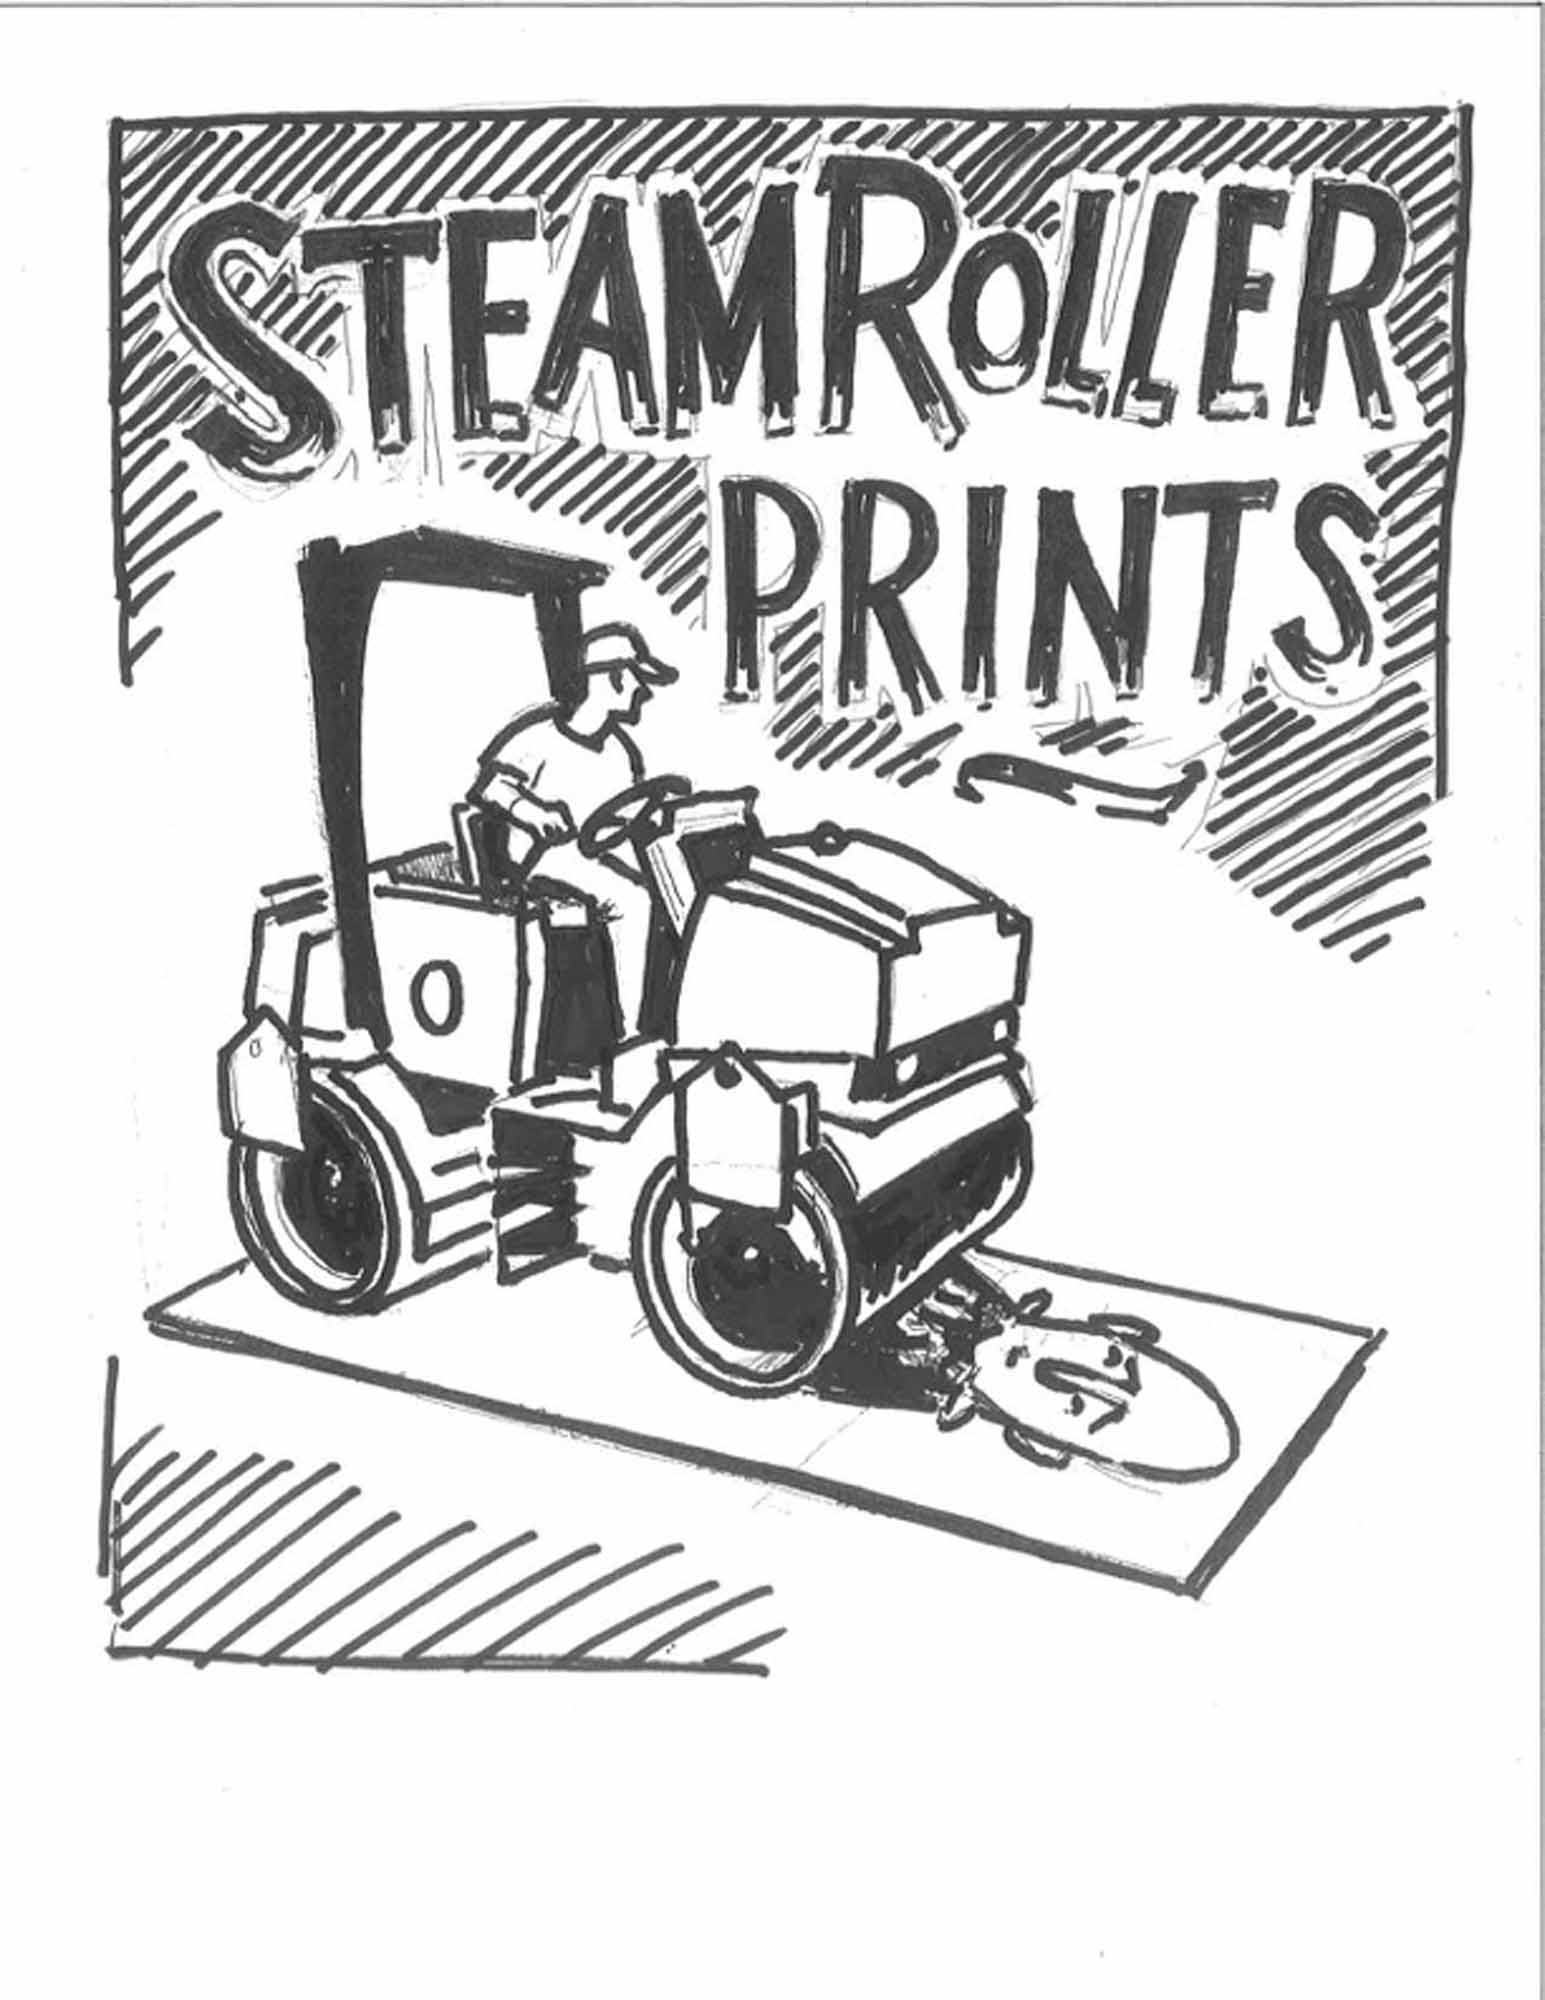 Block Printing with a Steam Roller: Making a Neighborhood Image for a Steamroller Print Event